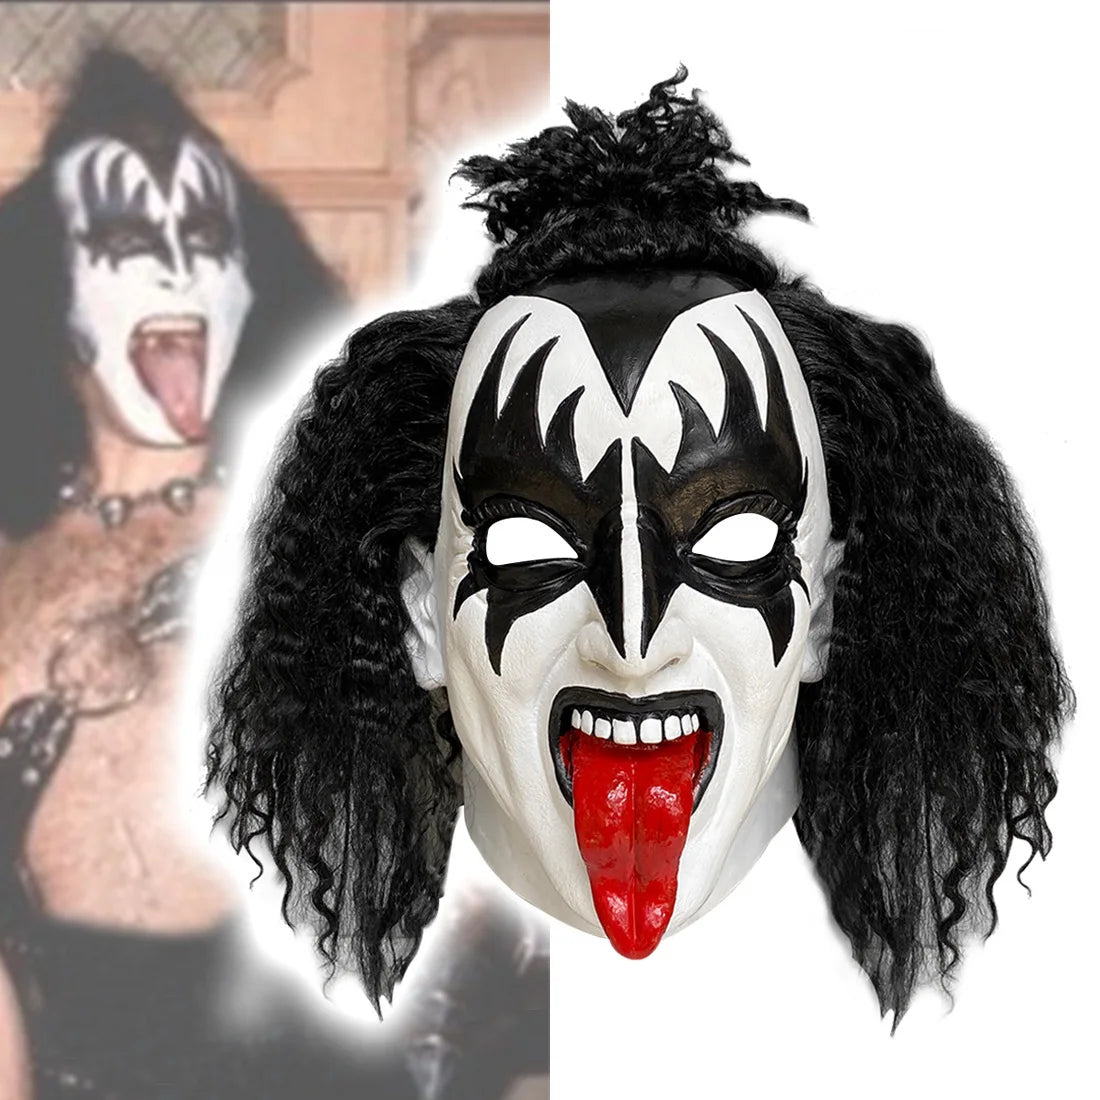 Halloween Kiss Gene Simmons Lead Singer Latex Mask - Electric Music Festival Cosplay Horror Masks for Party Dress Up and Performance Props-A-One Size-